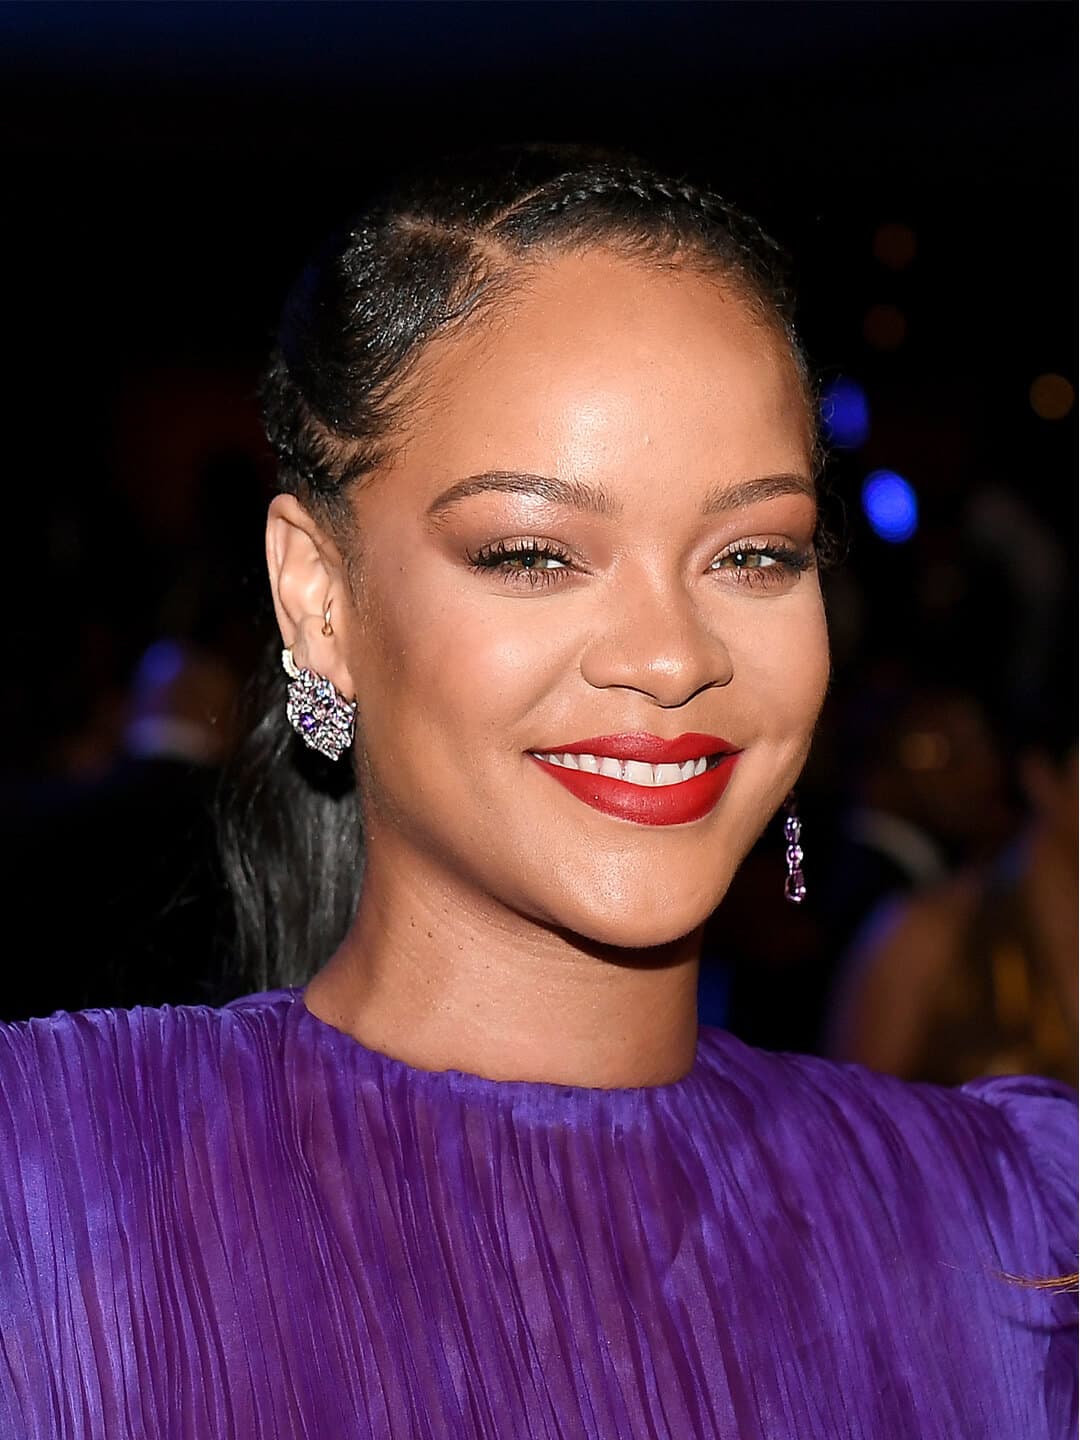 Smiling Rihanna in a purple pleated dress rocking a braided pony tail hairstyle